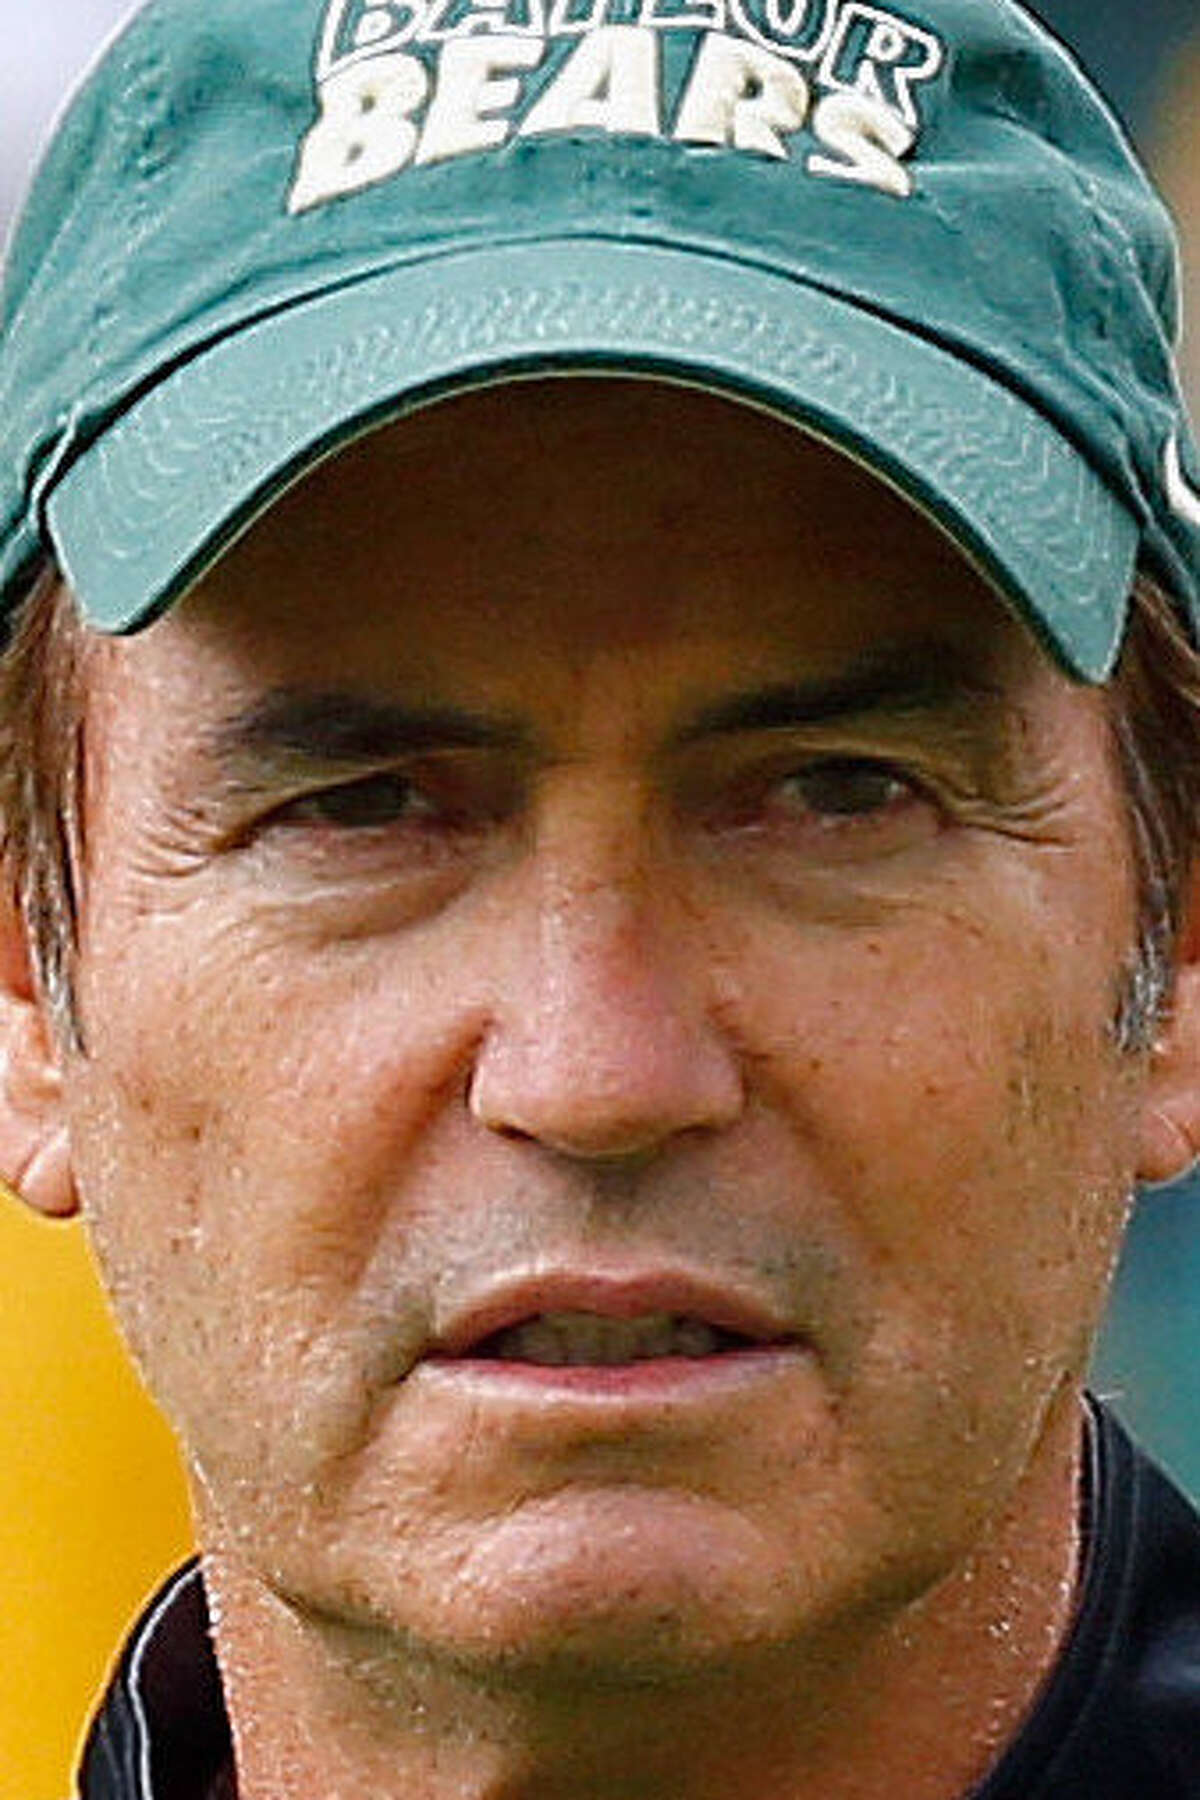 Art Briles described Baylor's week off as “horrible ... extremely hard” after losing to WVU.